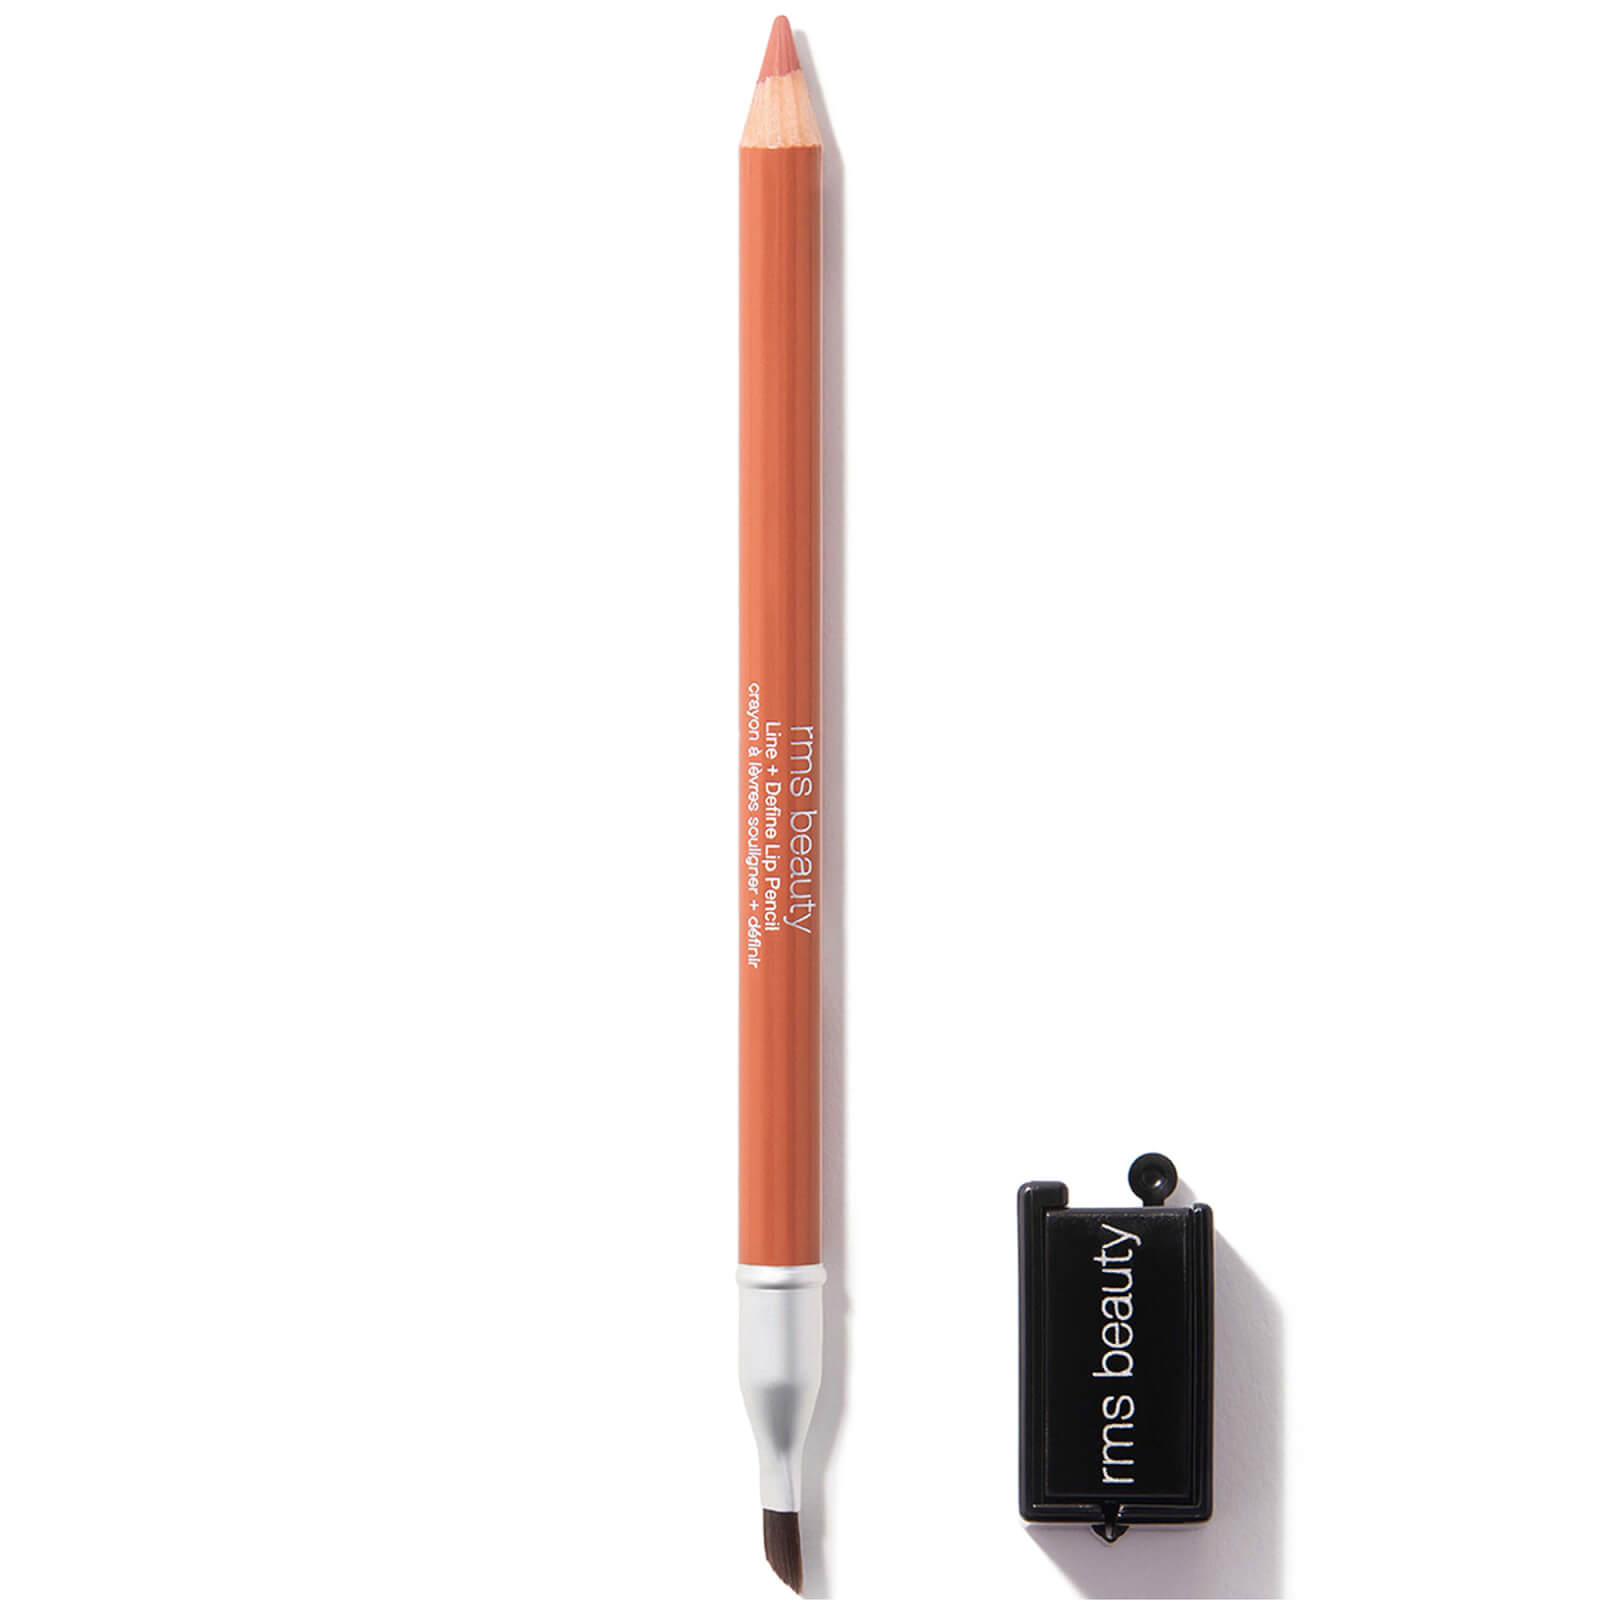 Rms Beauty Go Nude Lip Pencil 1.08g (various Shades) - Daytime Nude